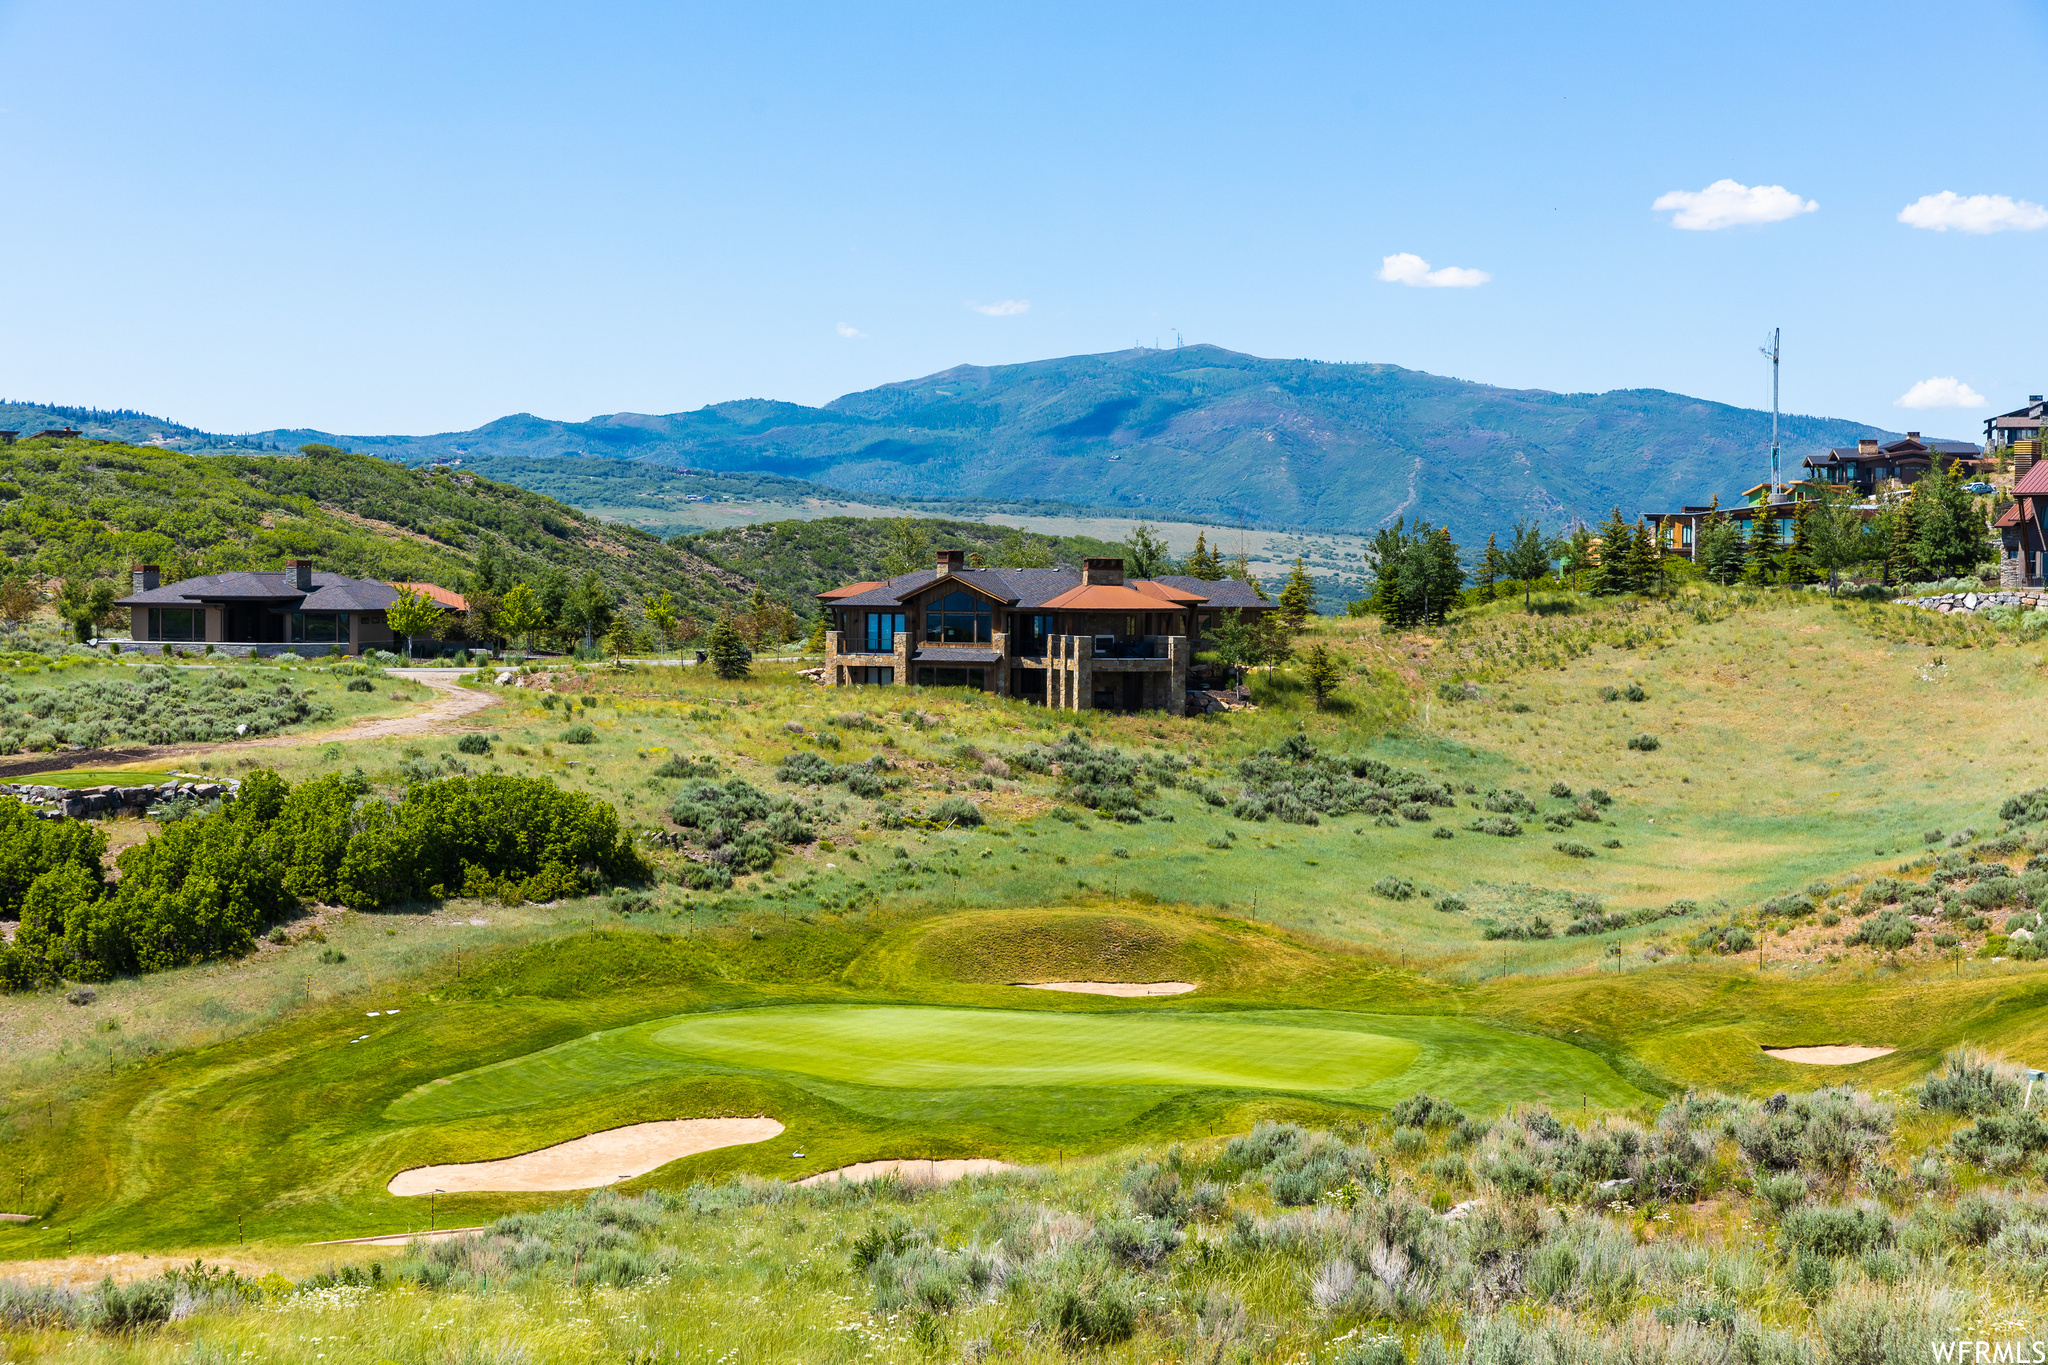 3204 WAPITI CANYON, Park City, Utah 84098, 5 Bedrooms Bedrooms, 22 Rooms Rooms,5 BathroomsBathrooms,Residential,For sale,WAPITI CANYON,1903647